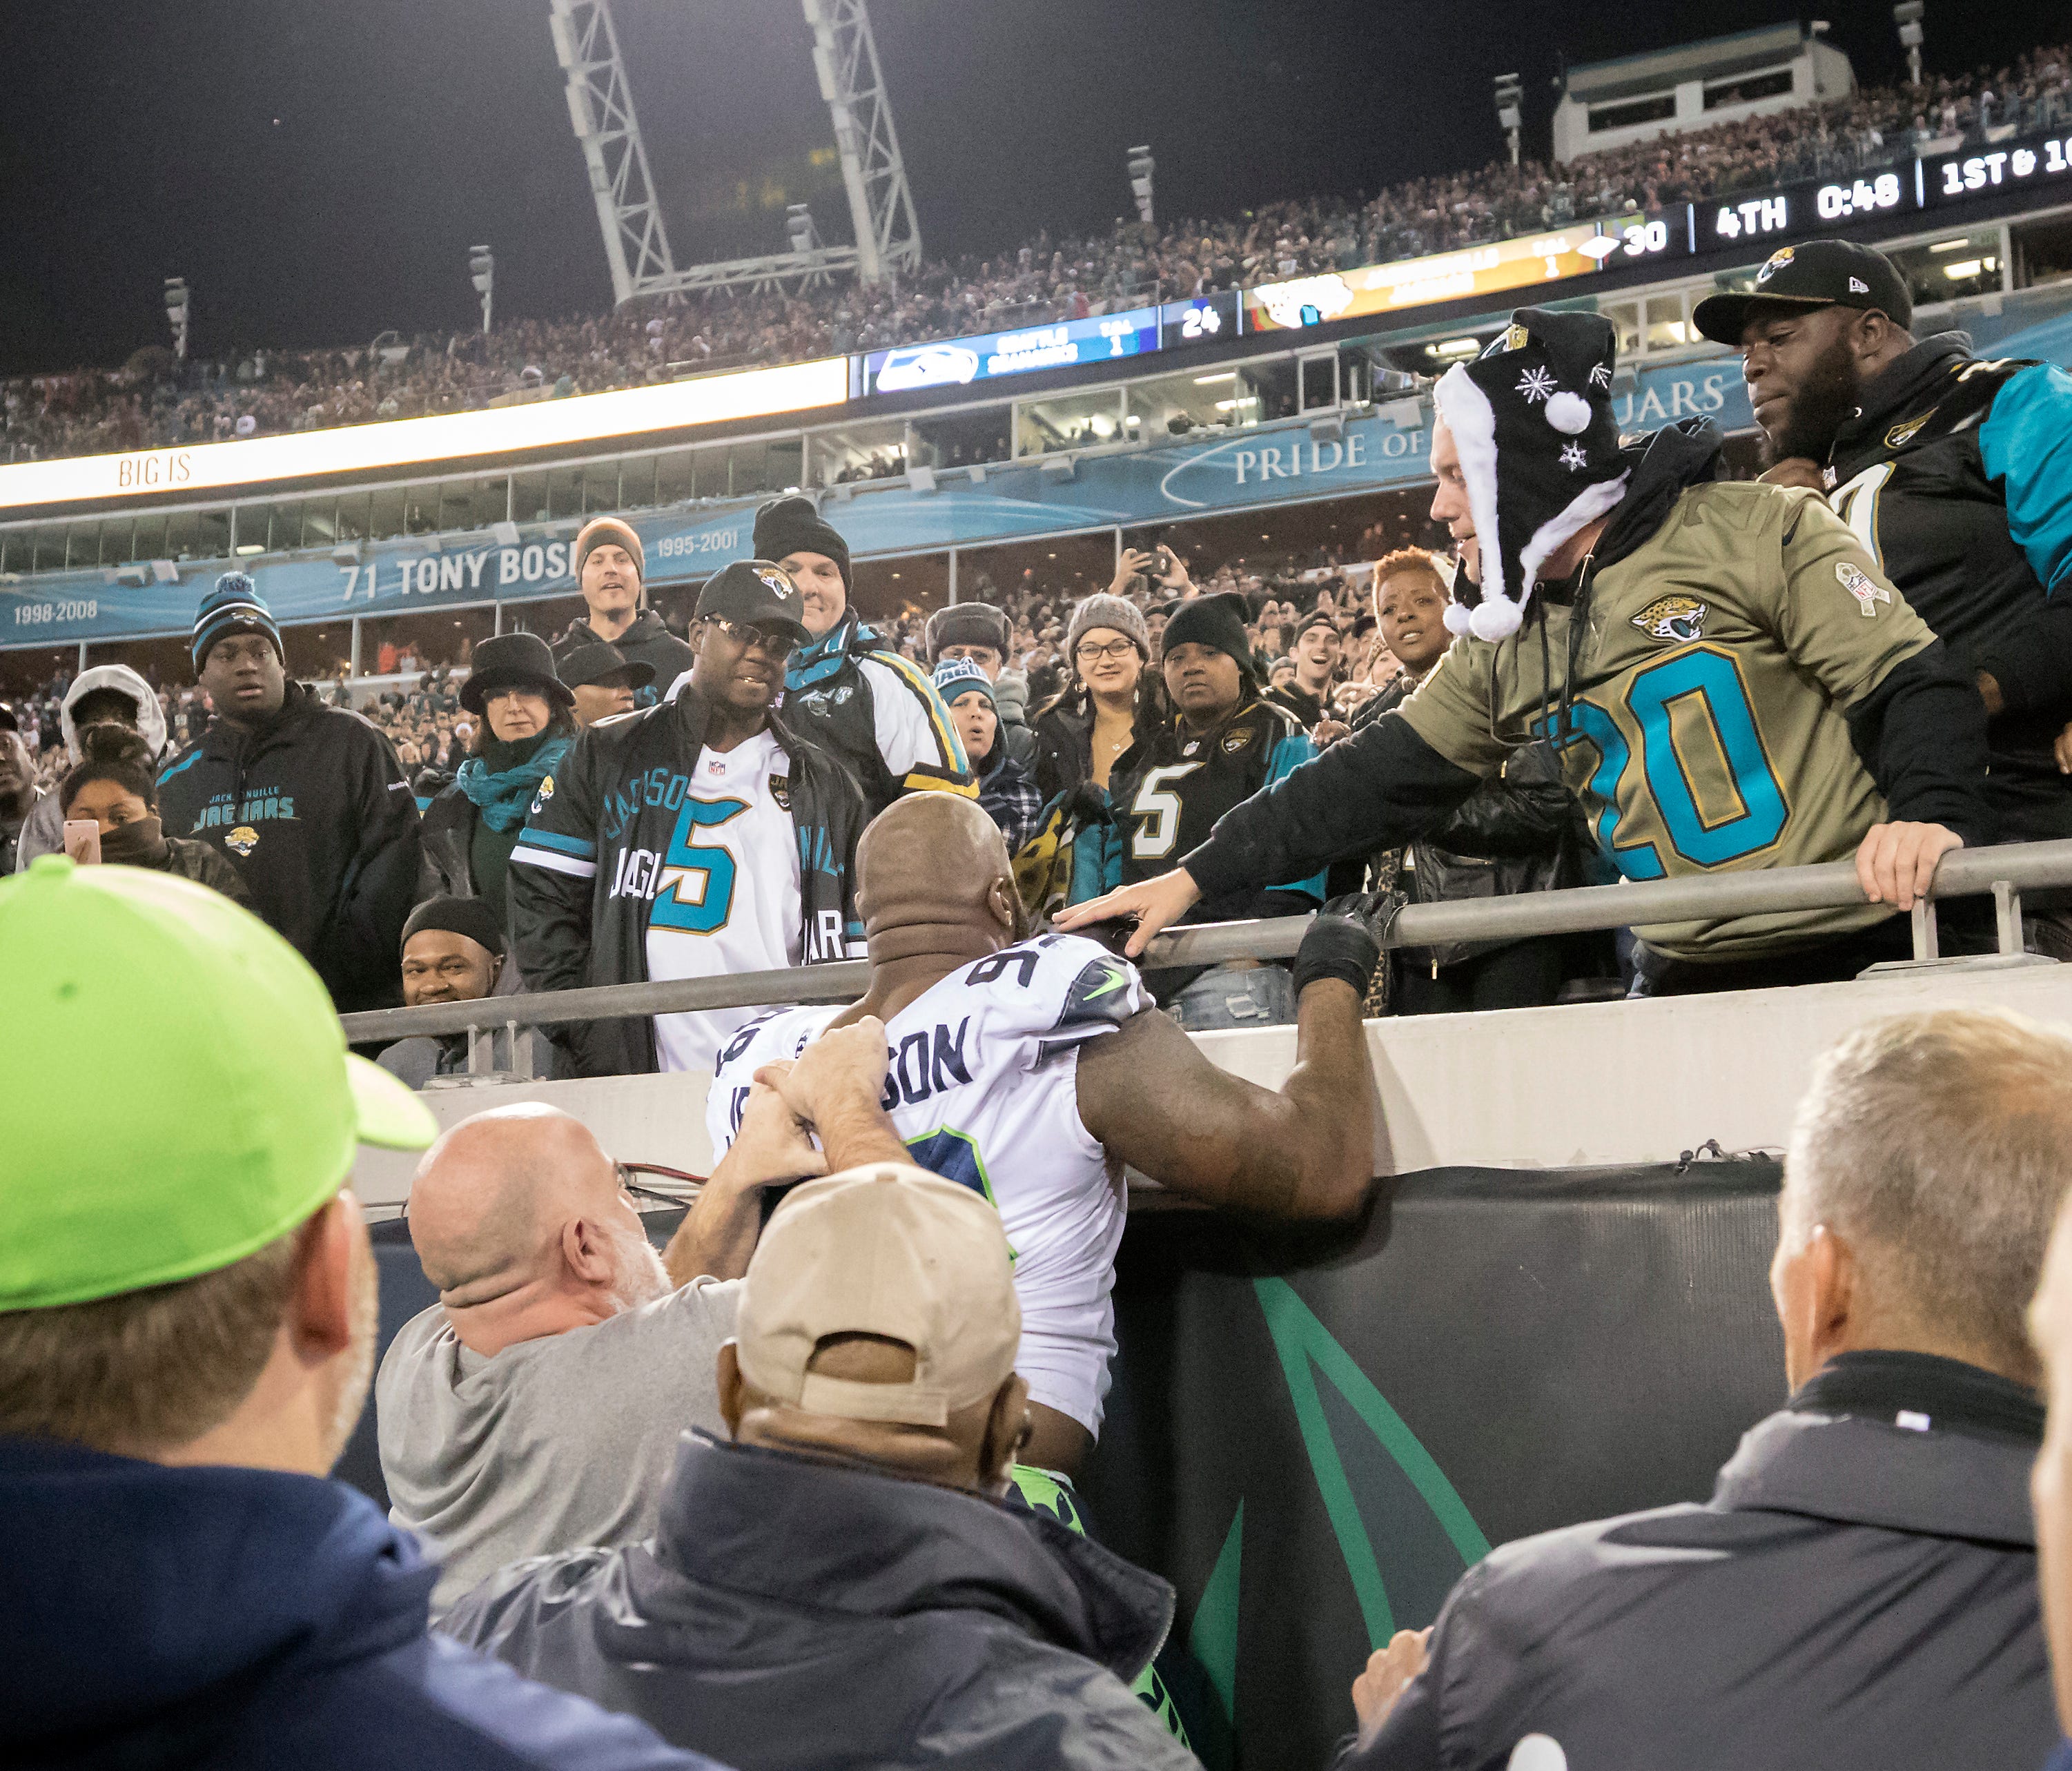 Seattle Seahawks DT Quinton Jefferson tries to climb up in the stands after Jacksonville Jaguars fans threw objects at him.